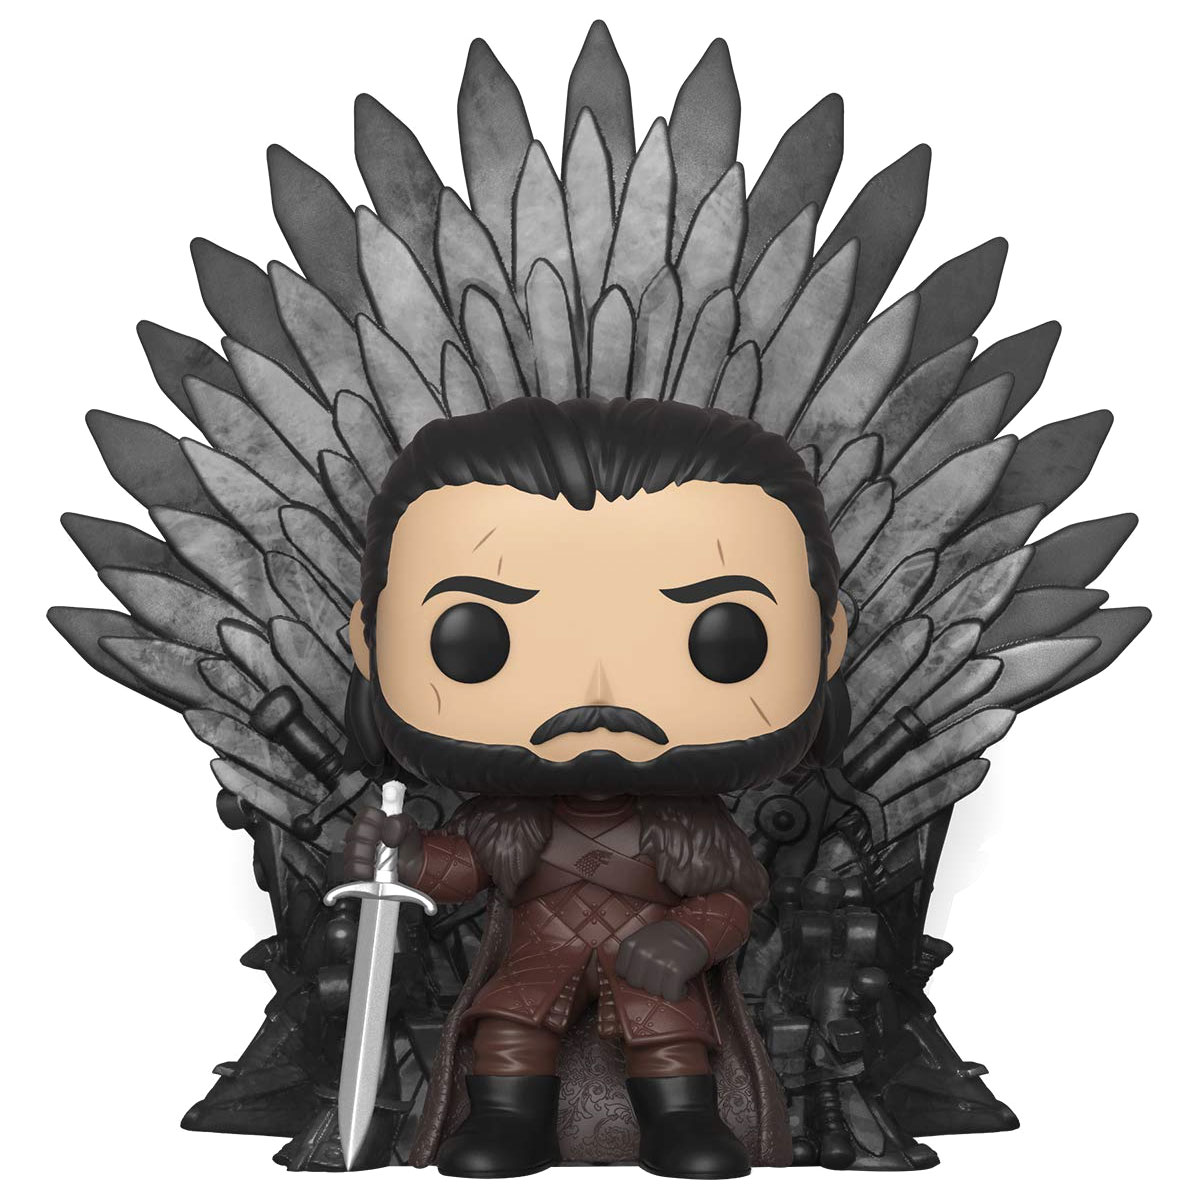 Funko Pop Deluxe Game of Thrones S10 Tyrion Lannister Sitting on Iron 